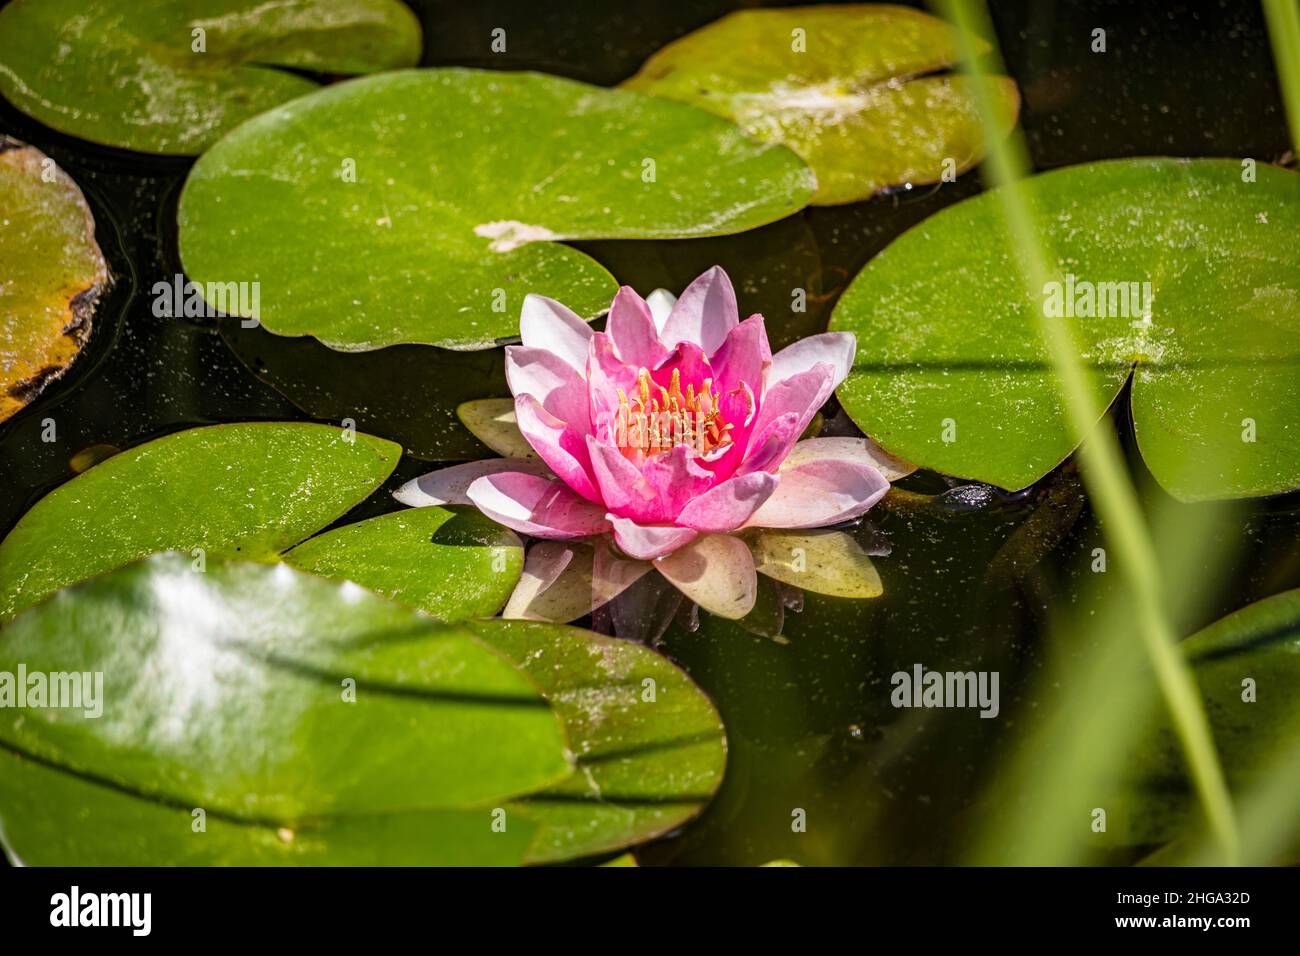 The beautiful pink and white flower of the water lily, lying on the surface of a pond. Its large and characteristic green leaves float on the water. C Stock Photo